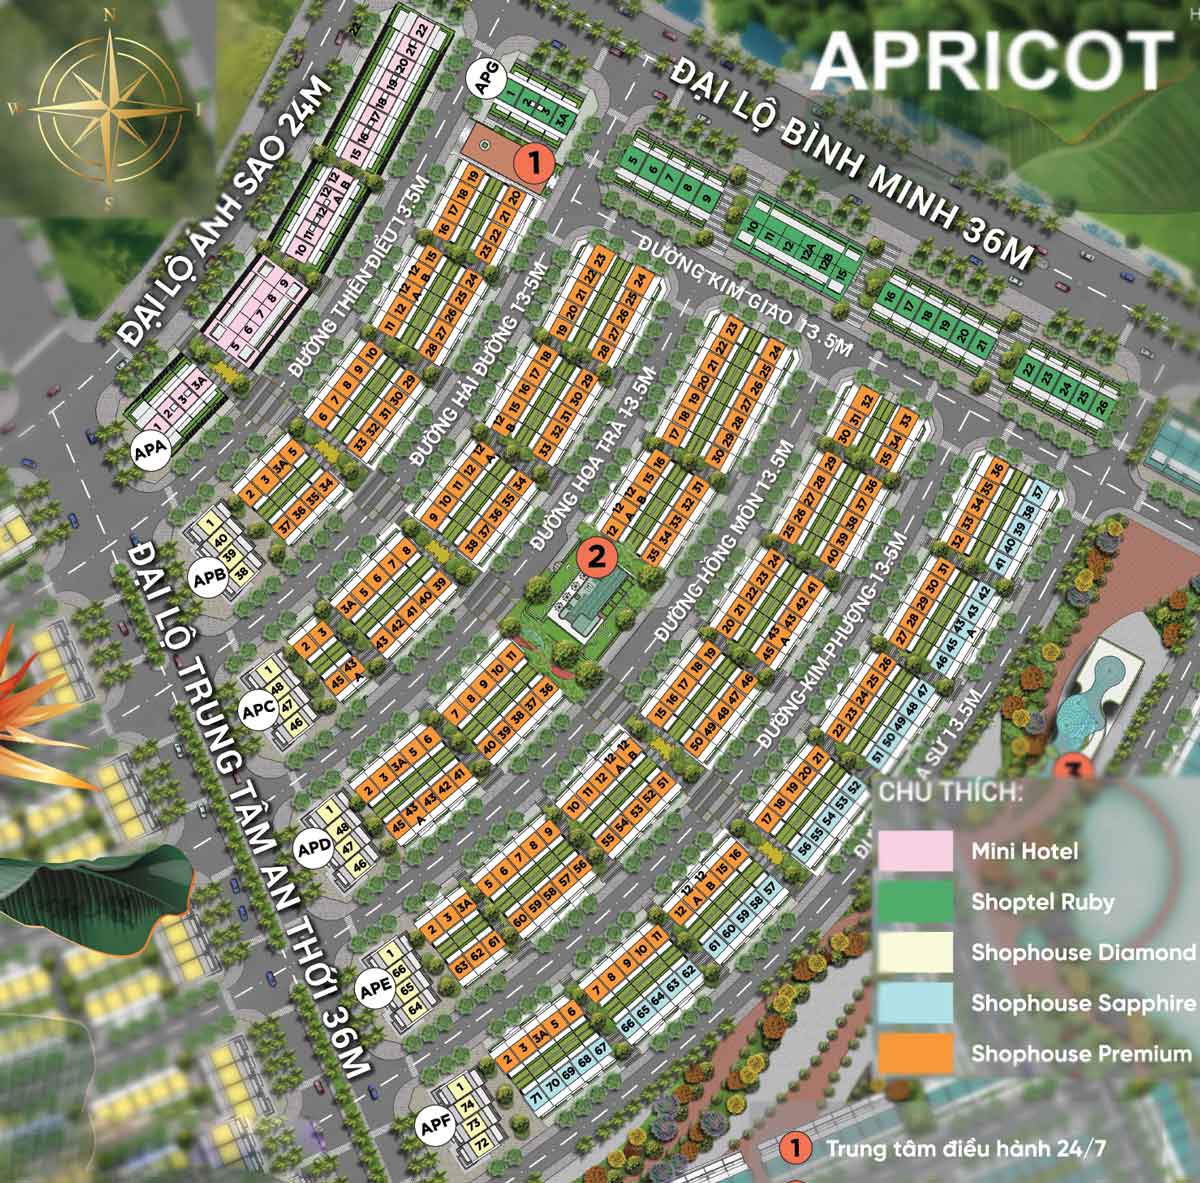 Floor Plan of Apricot subdivision